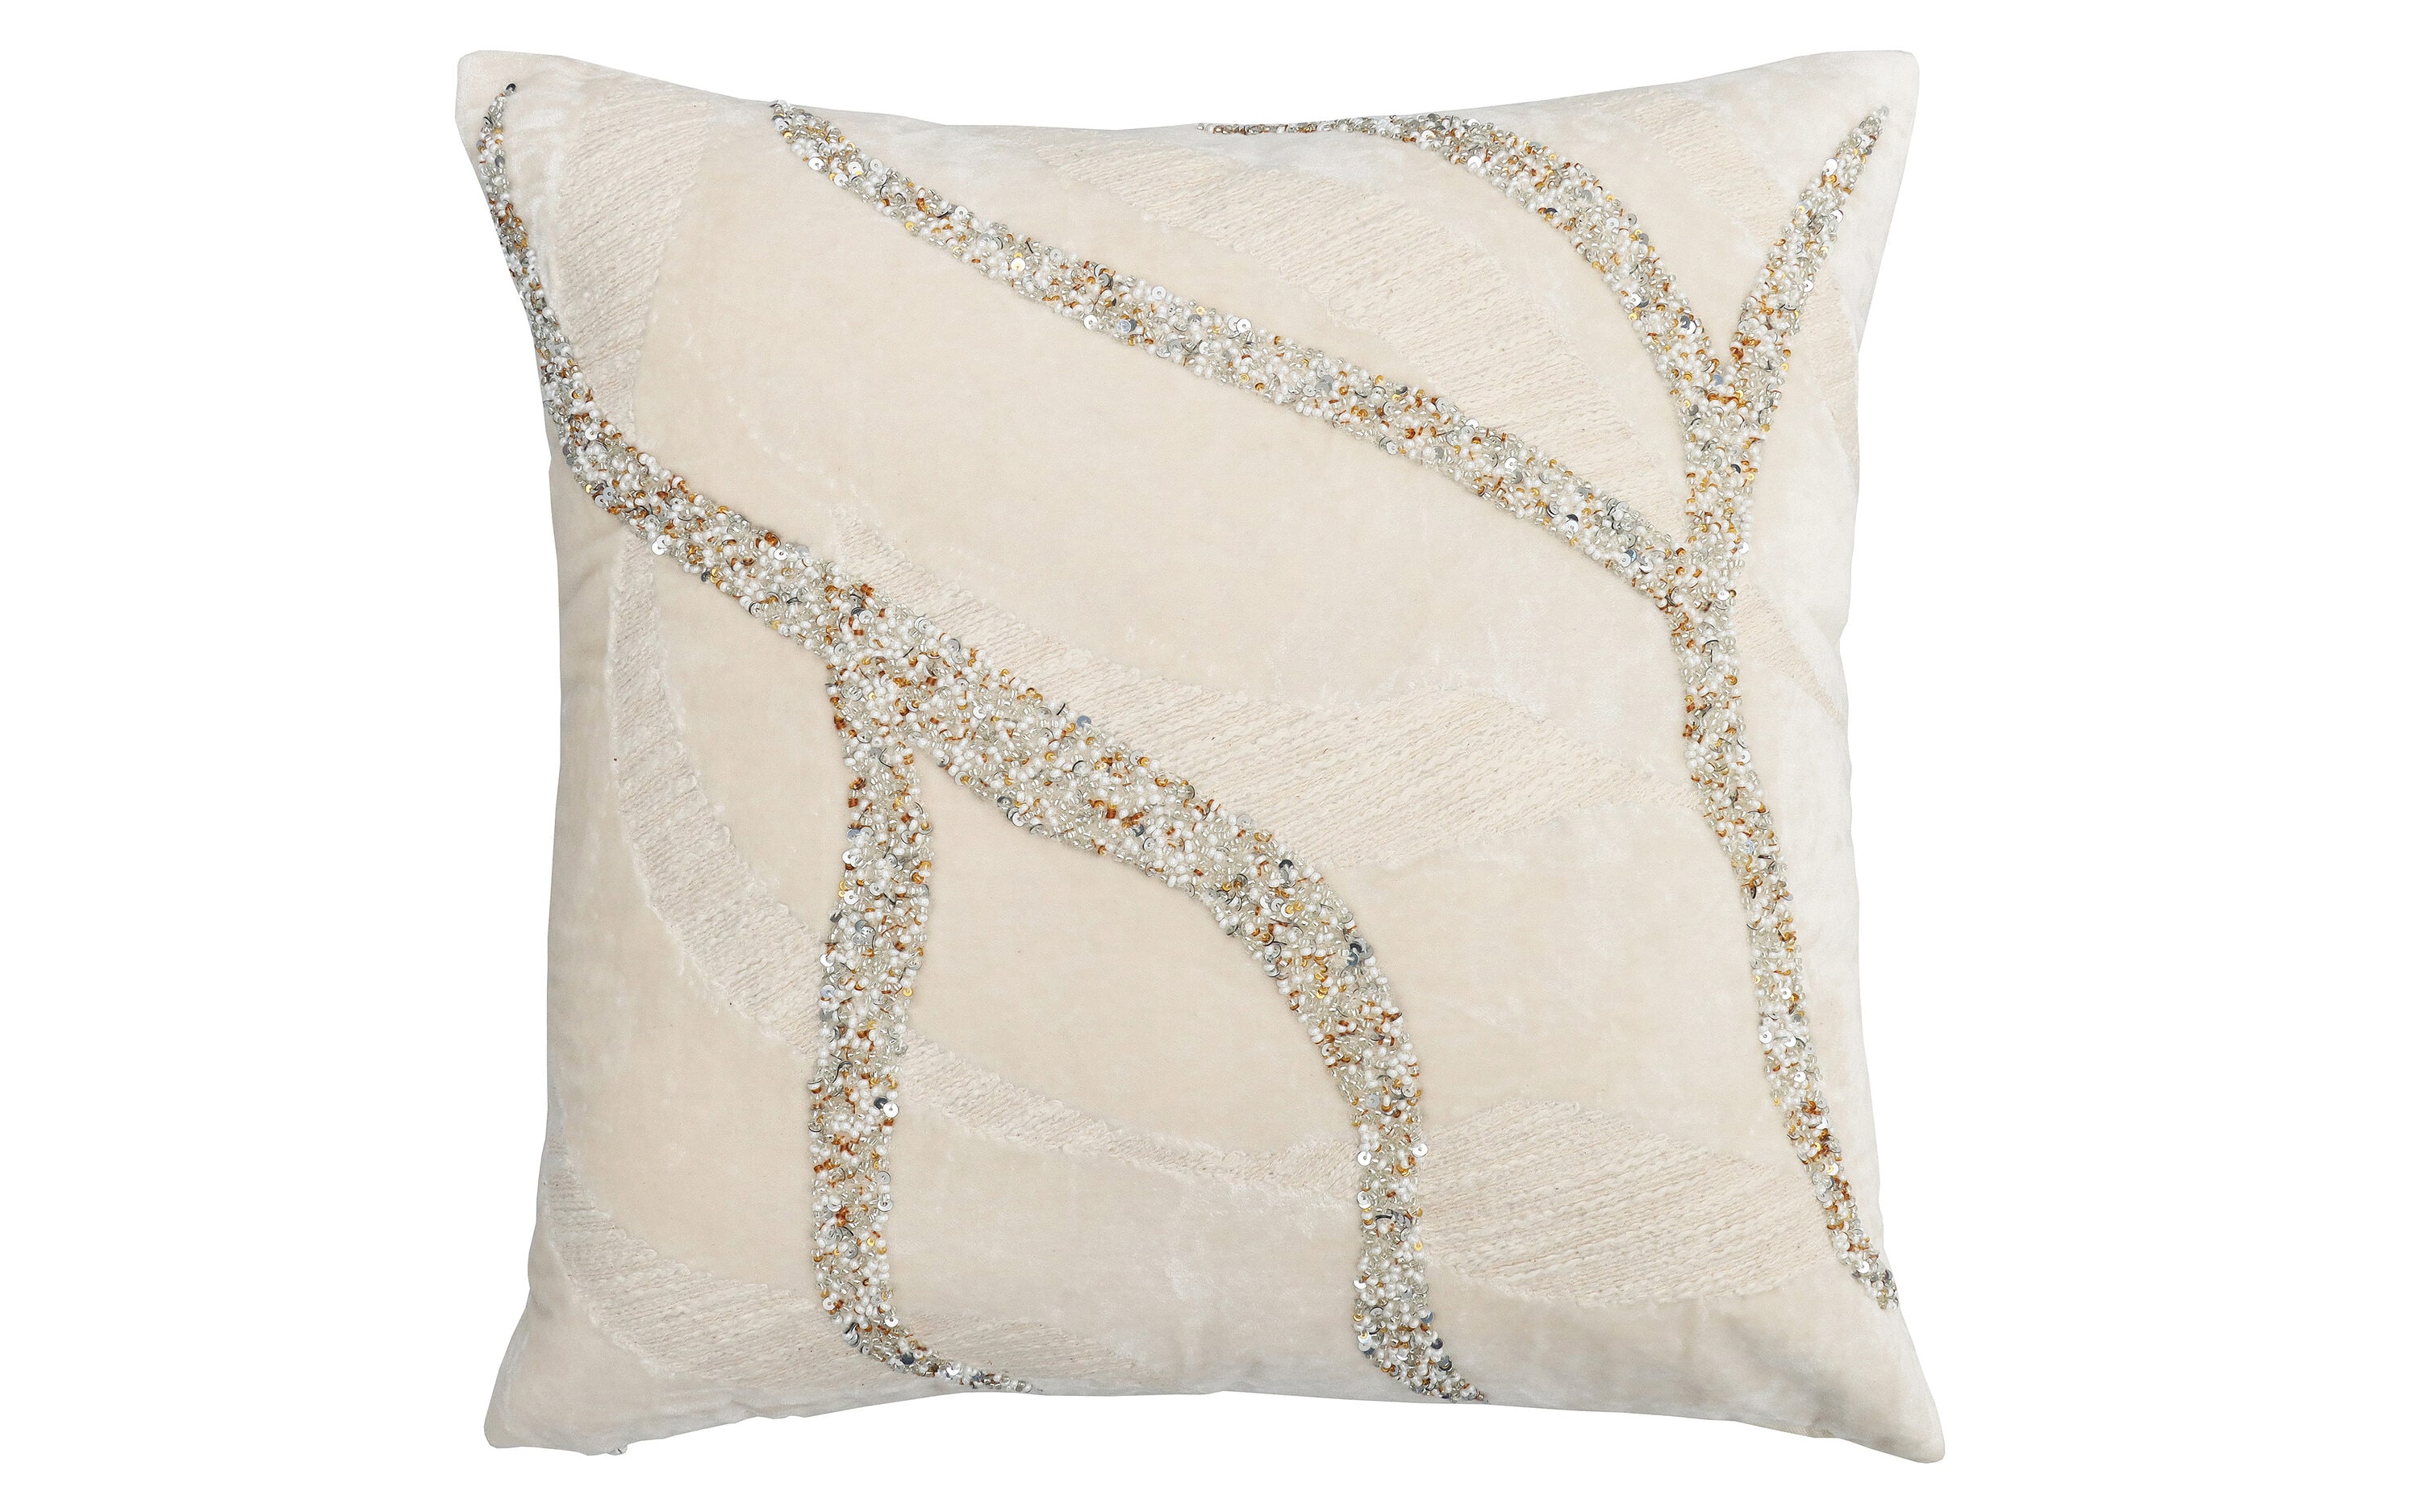 18 x 18 Handcrafted Cotton Accent Throw Pillows, Woven Lined